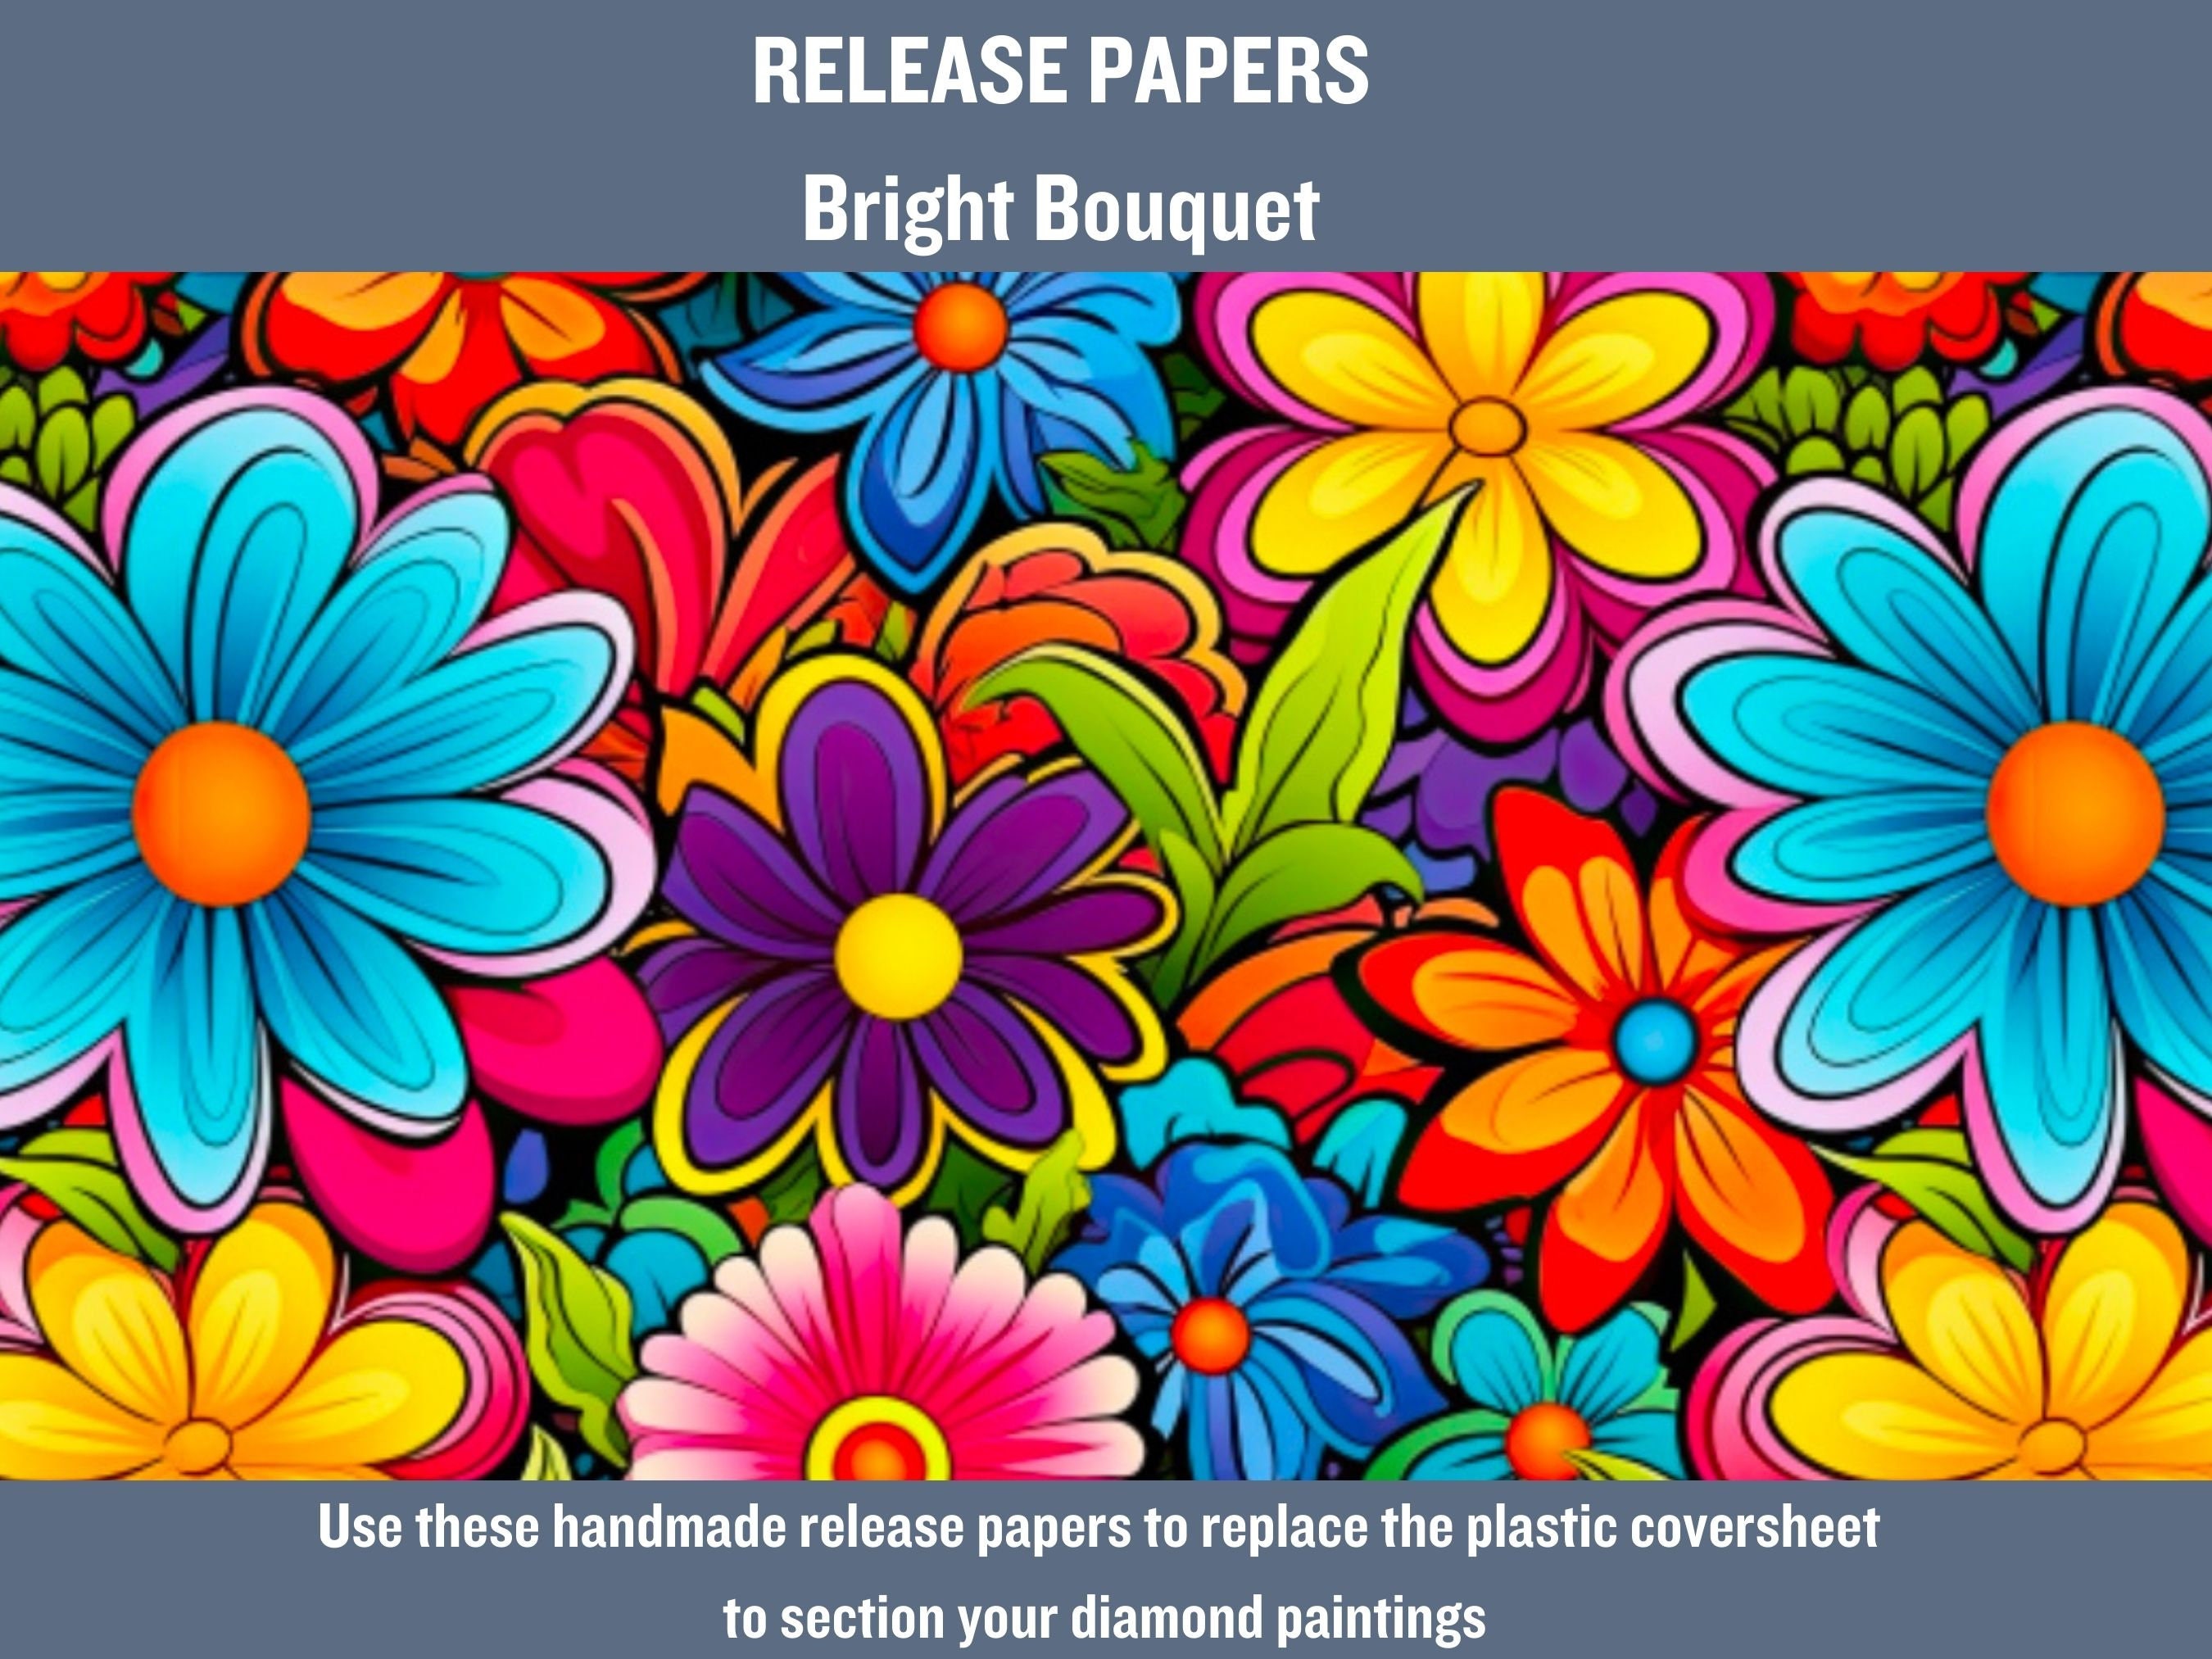 Diamond Painting Release Paper / Reusable Release Paper / 10 Non